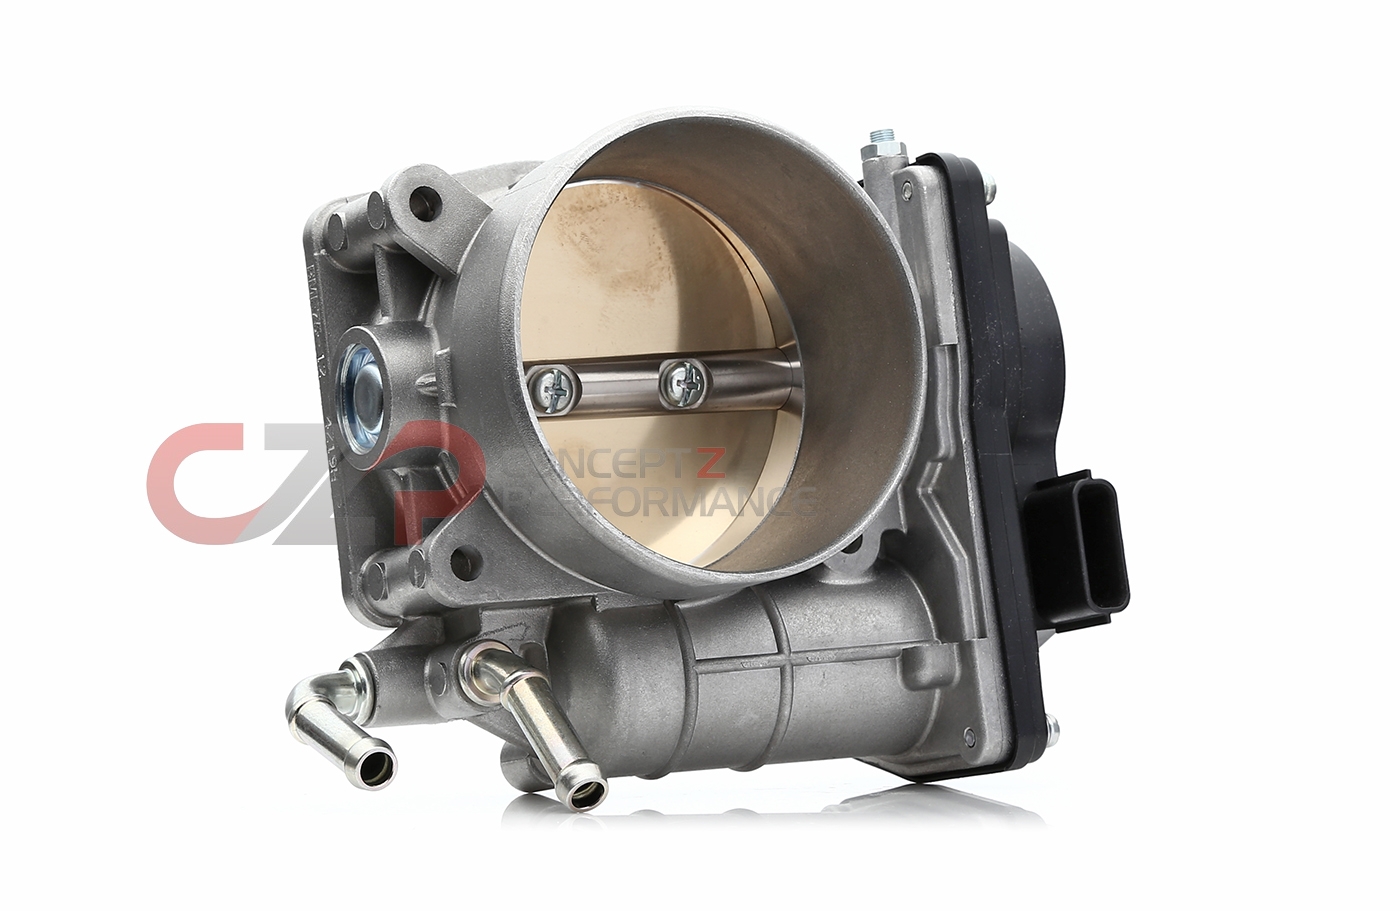 Hitachi 75mm Electronic Drive-By-Wire Throttle Body - Universal